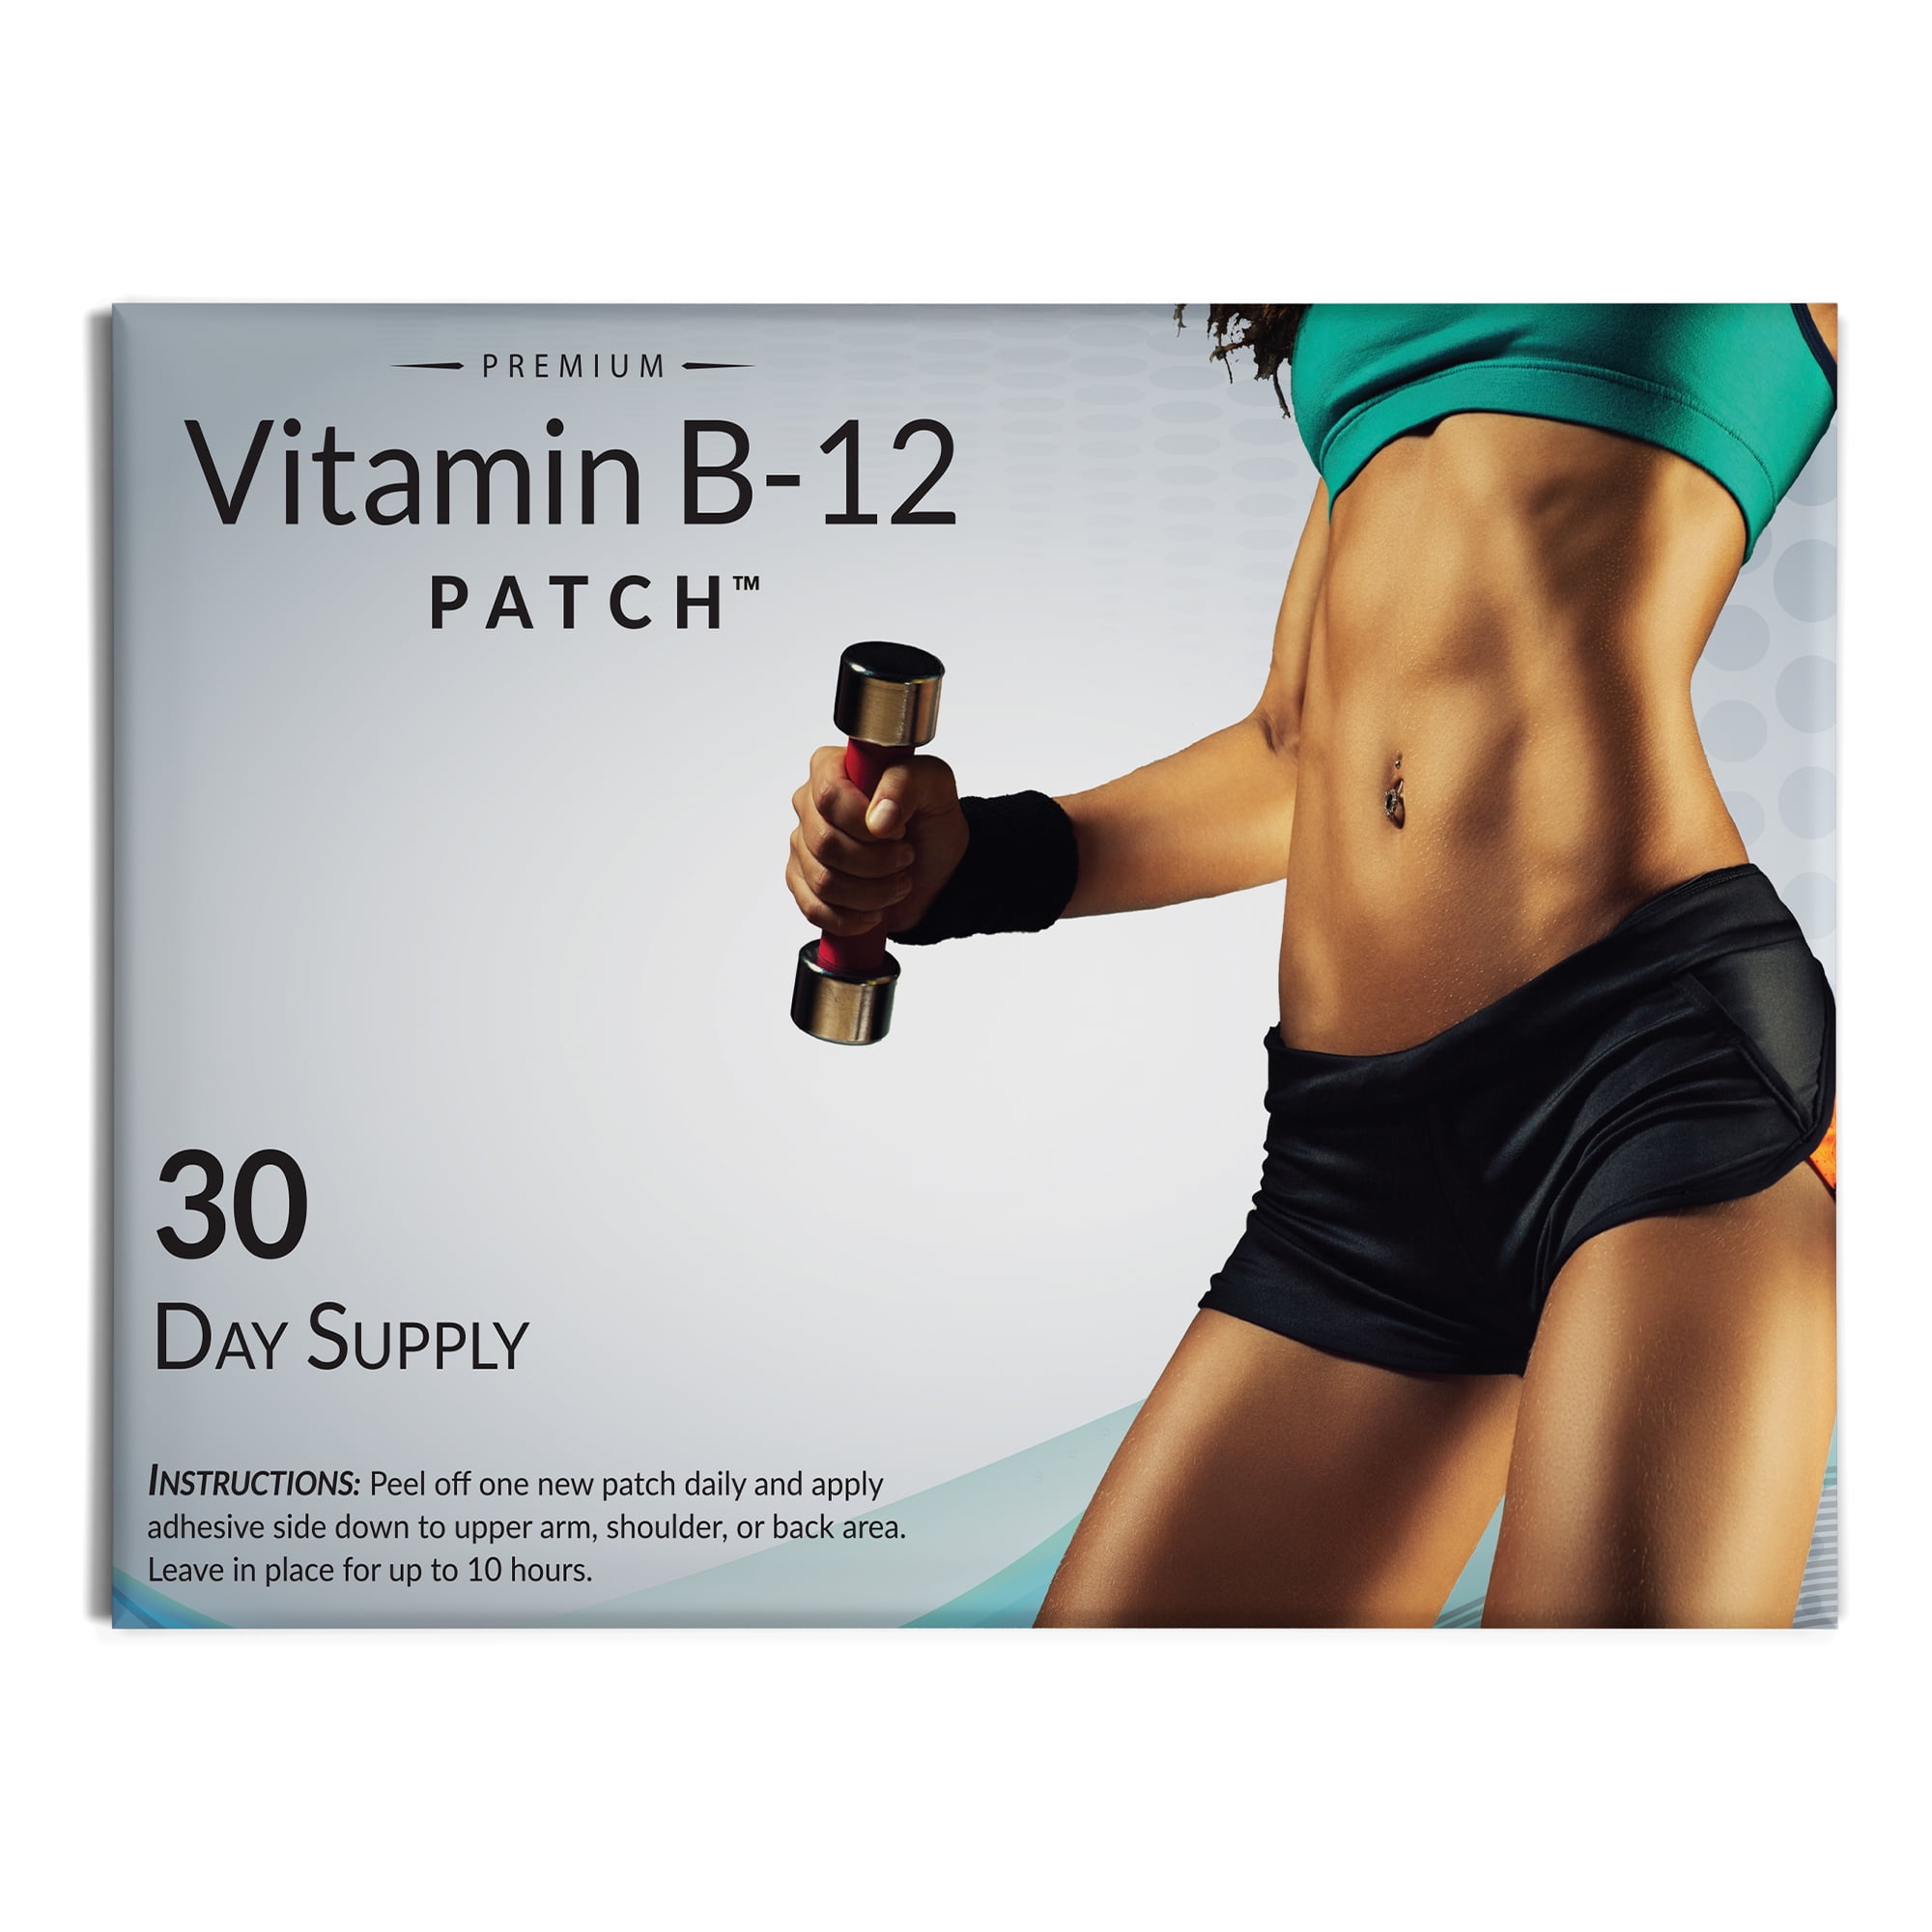 Vitapatch Vitamin B12 Premium Grade Weight Loss Support Patch 30 Day Supply